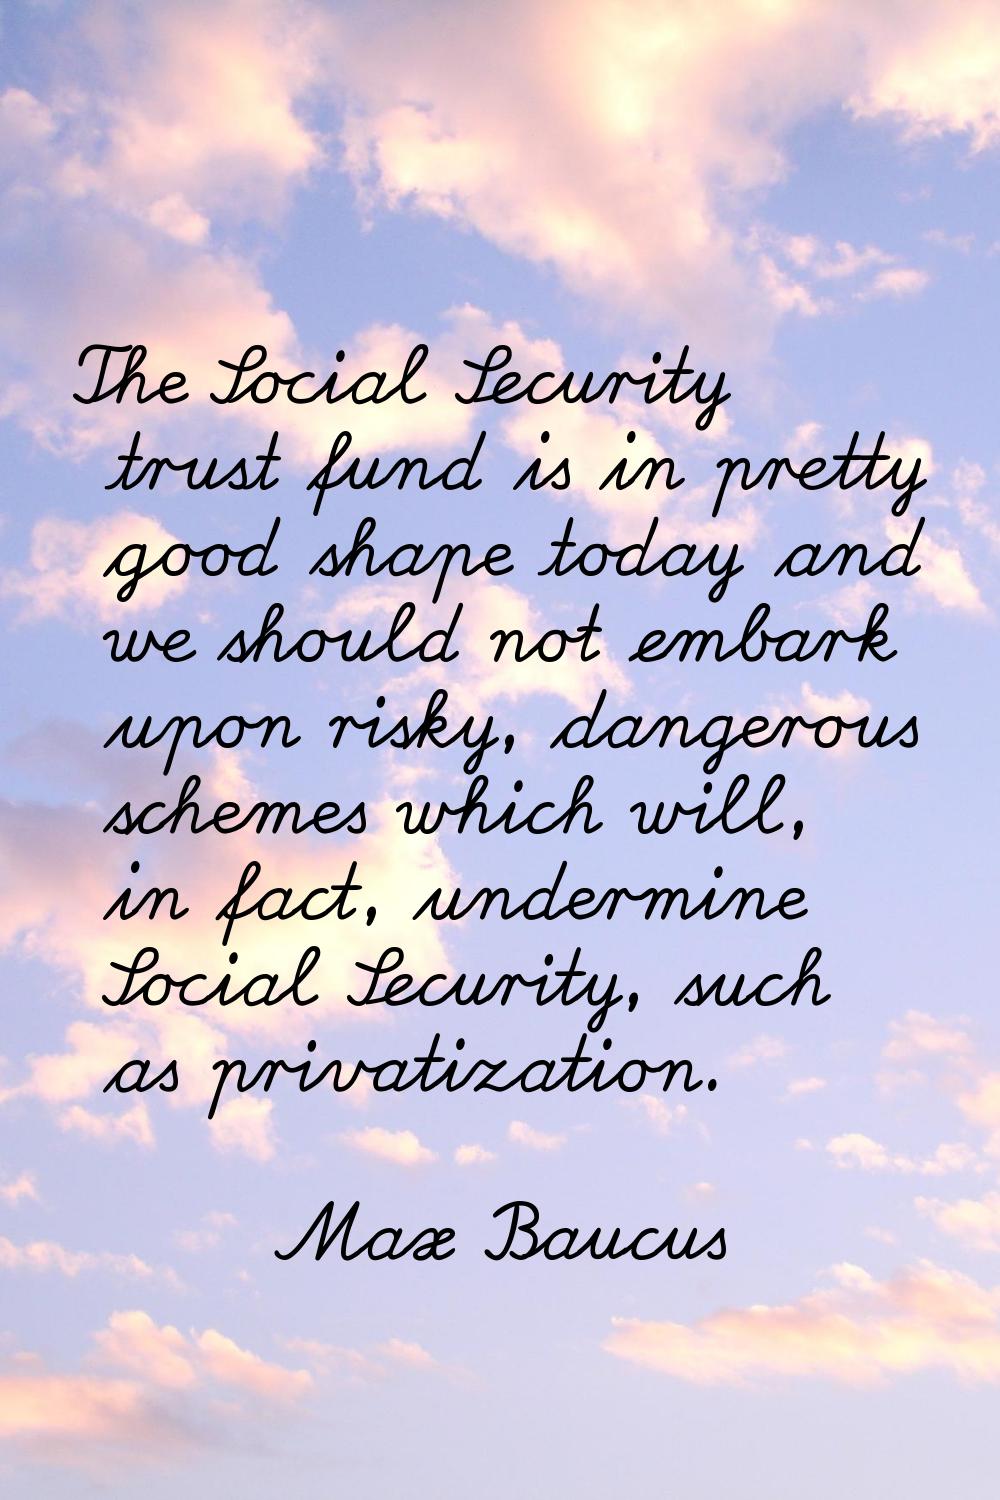 The Social Security trust fund is in pretty good shape today and we should not embark upon risky, d